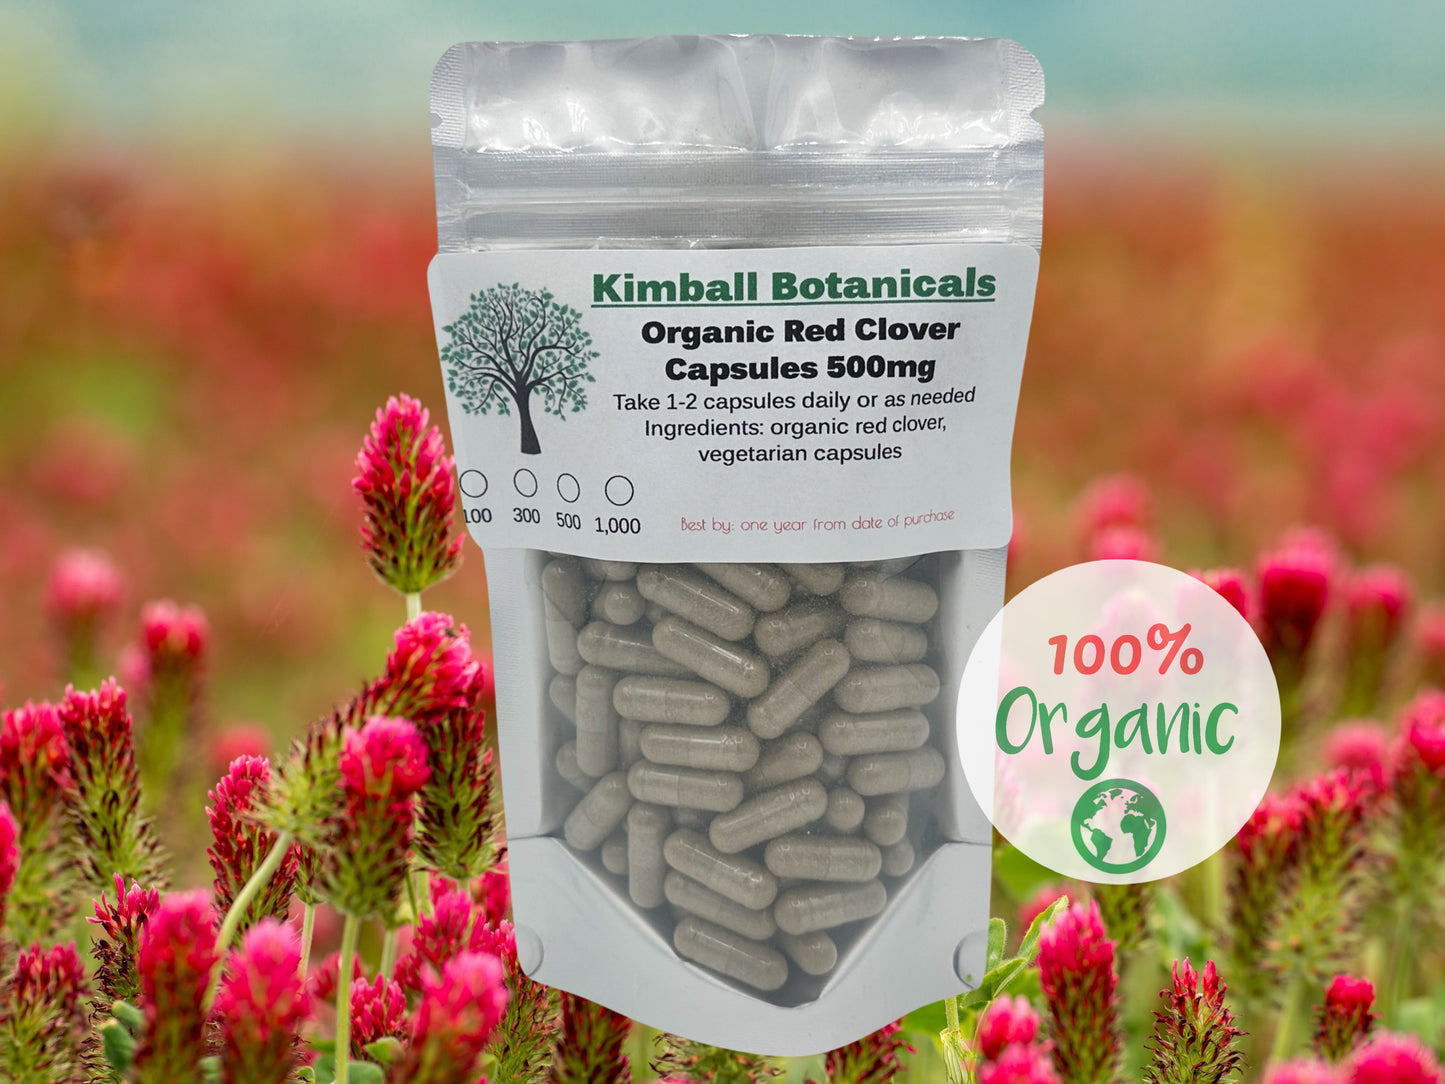 Organic red clover blossom 500mg vegetarian capsules made fresh to order.